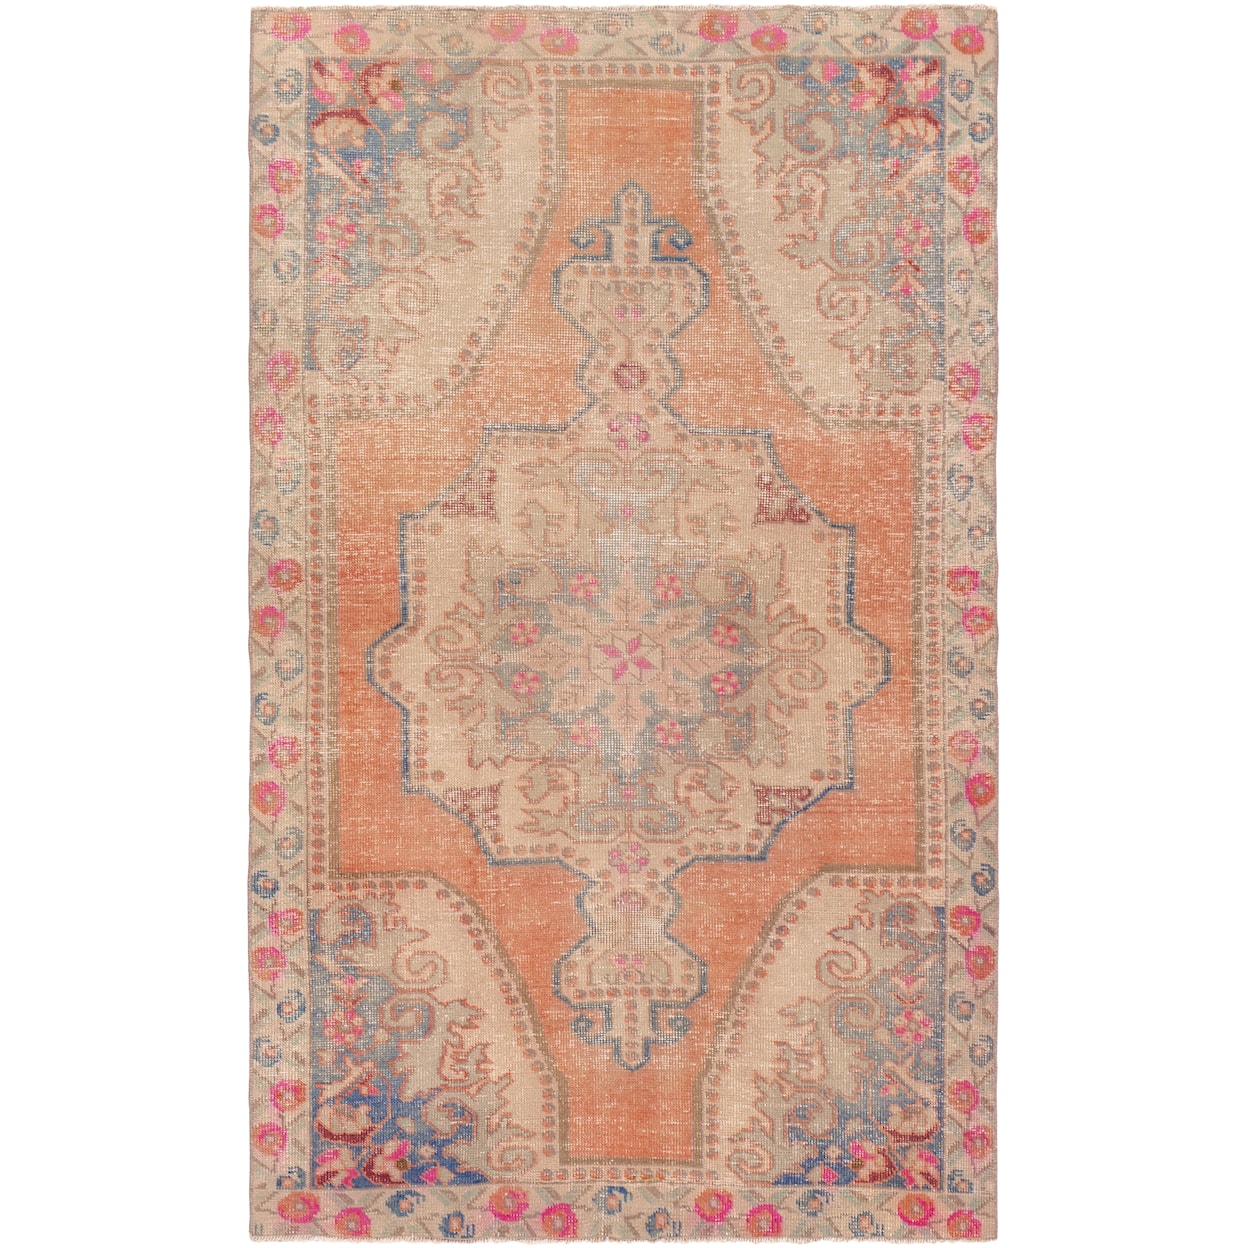 Ruby-Gordon Accents Antique One of a Kind Rugs